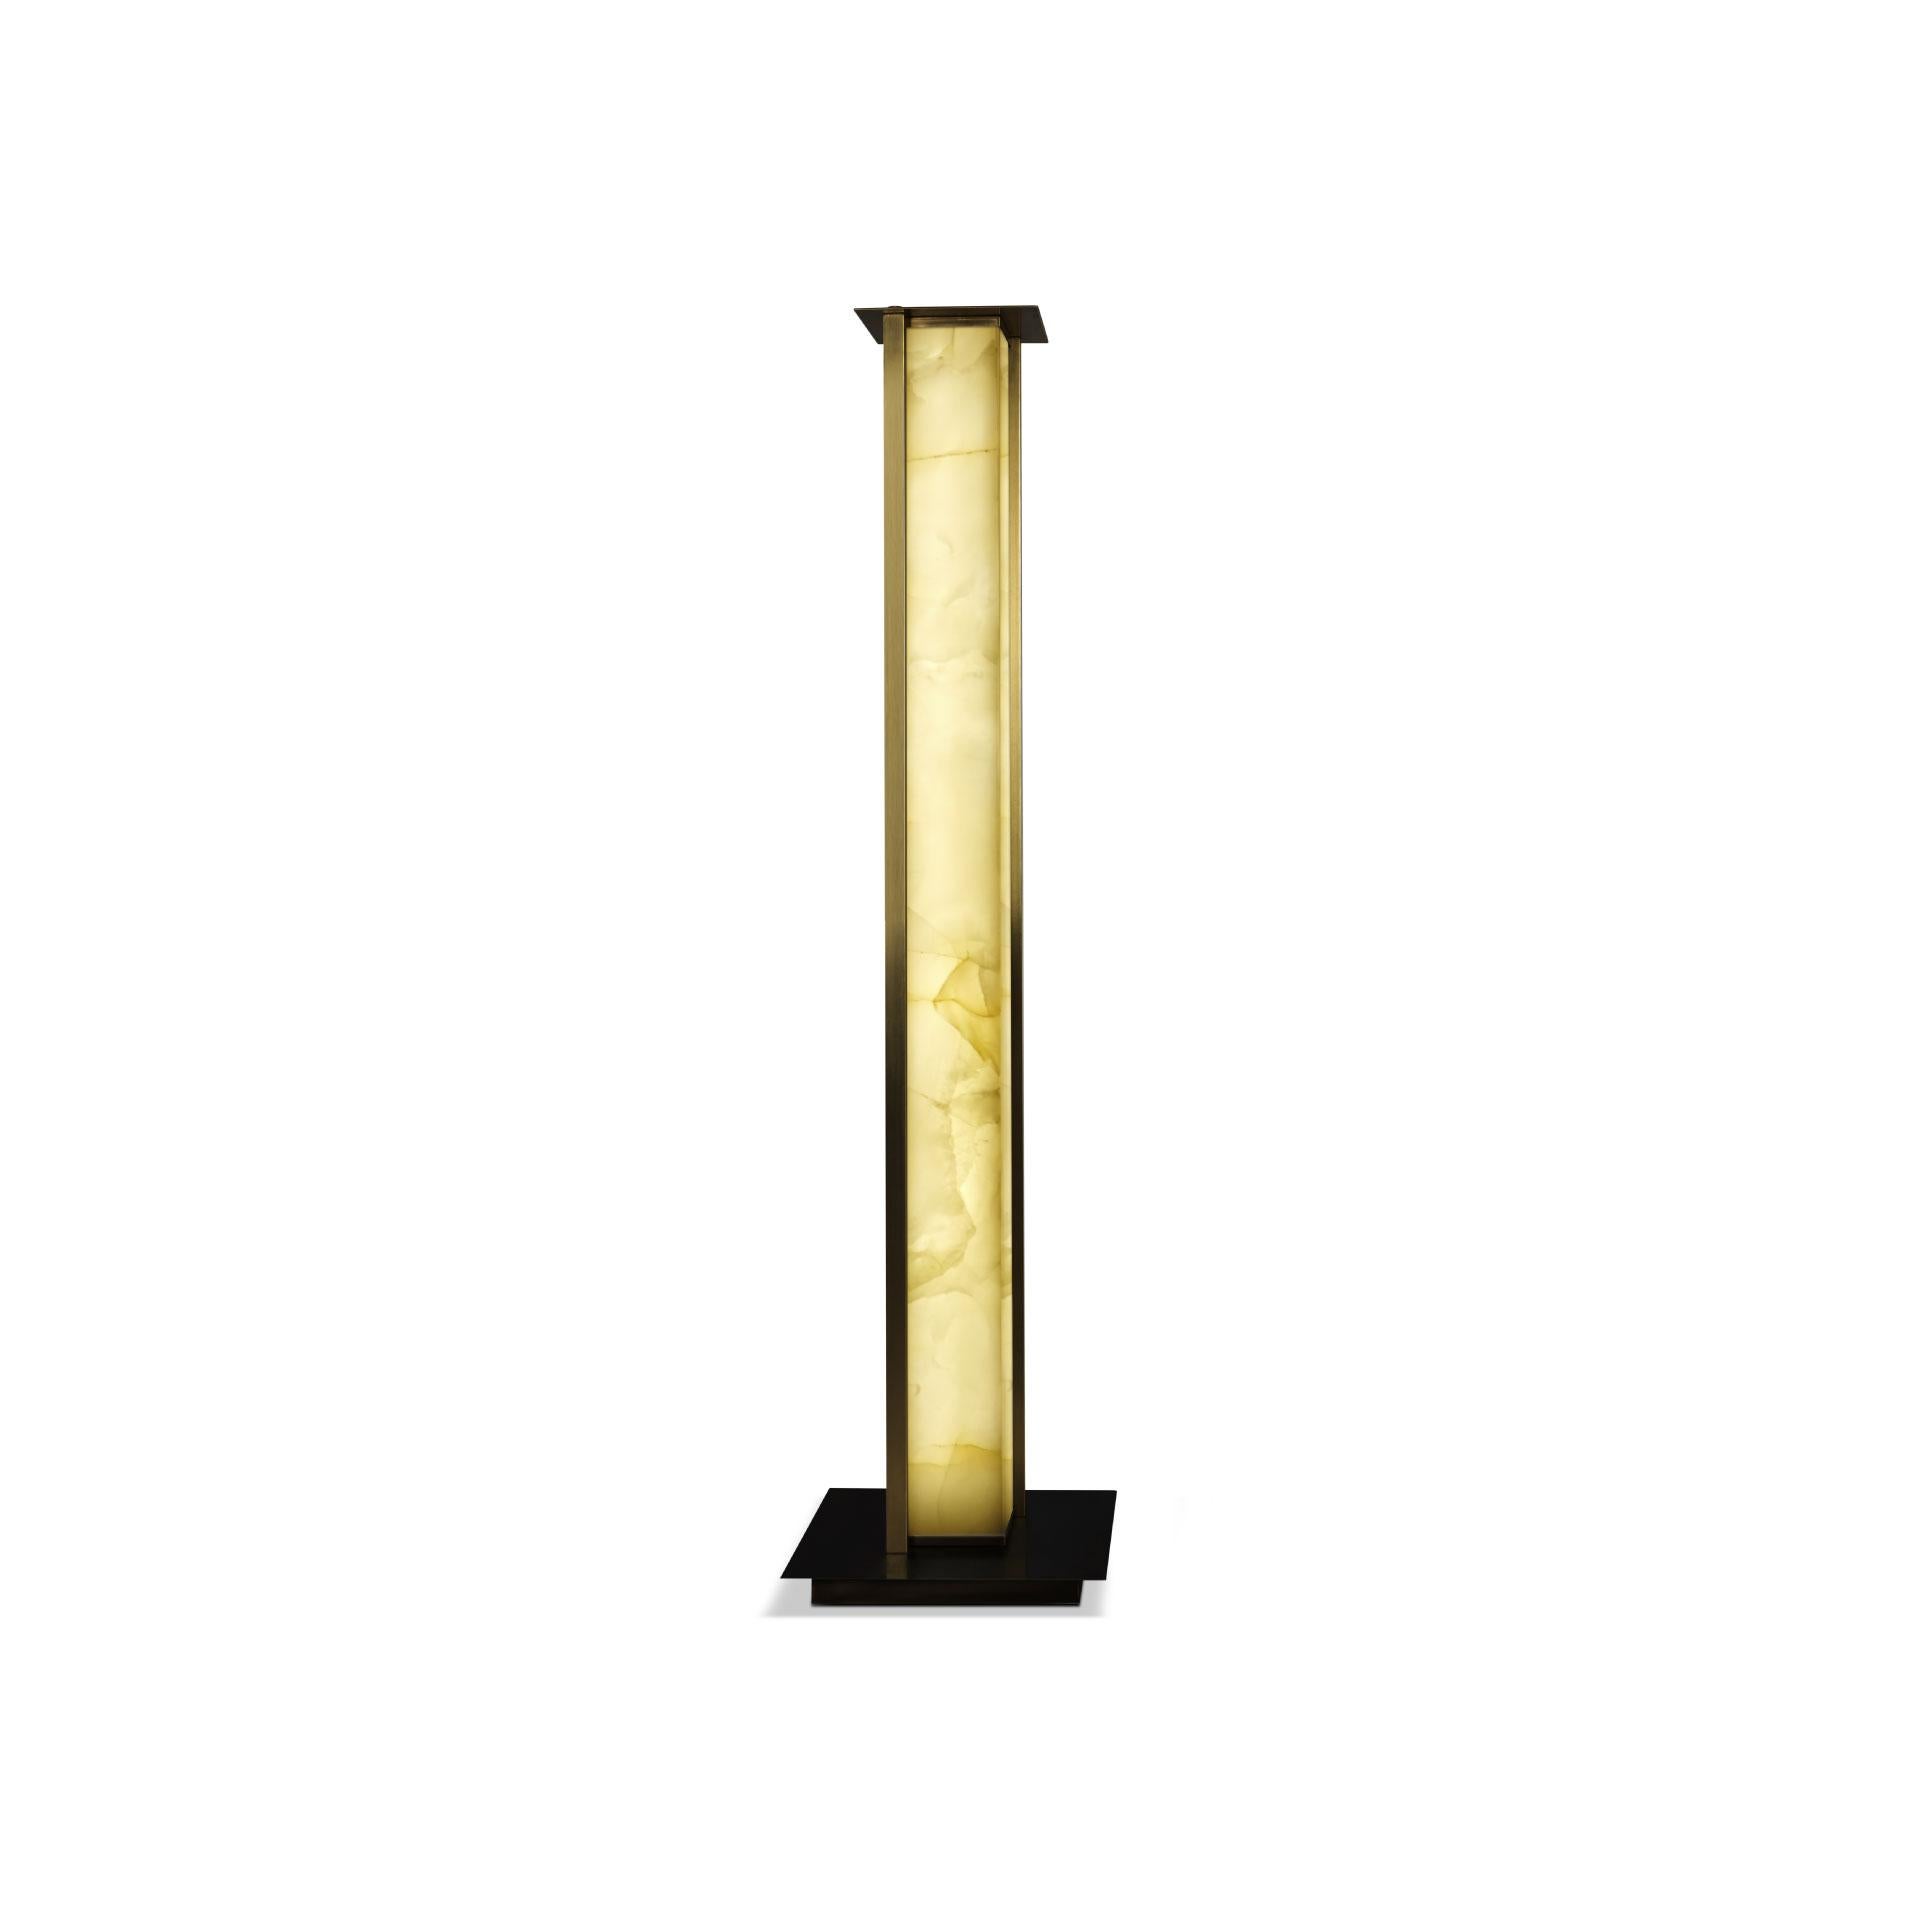 Inspired by Washington’s landmark and taking its shape, Porus Studio designed this modern tall lamp. Featuring a base in aged brushed brass and an onyx body embraced with a brushed brass structure, the Washington floor lamp is the masterpiece your